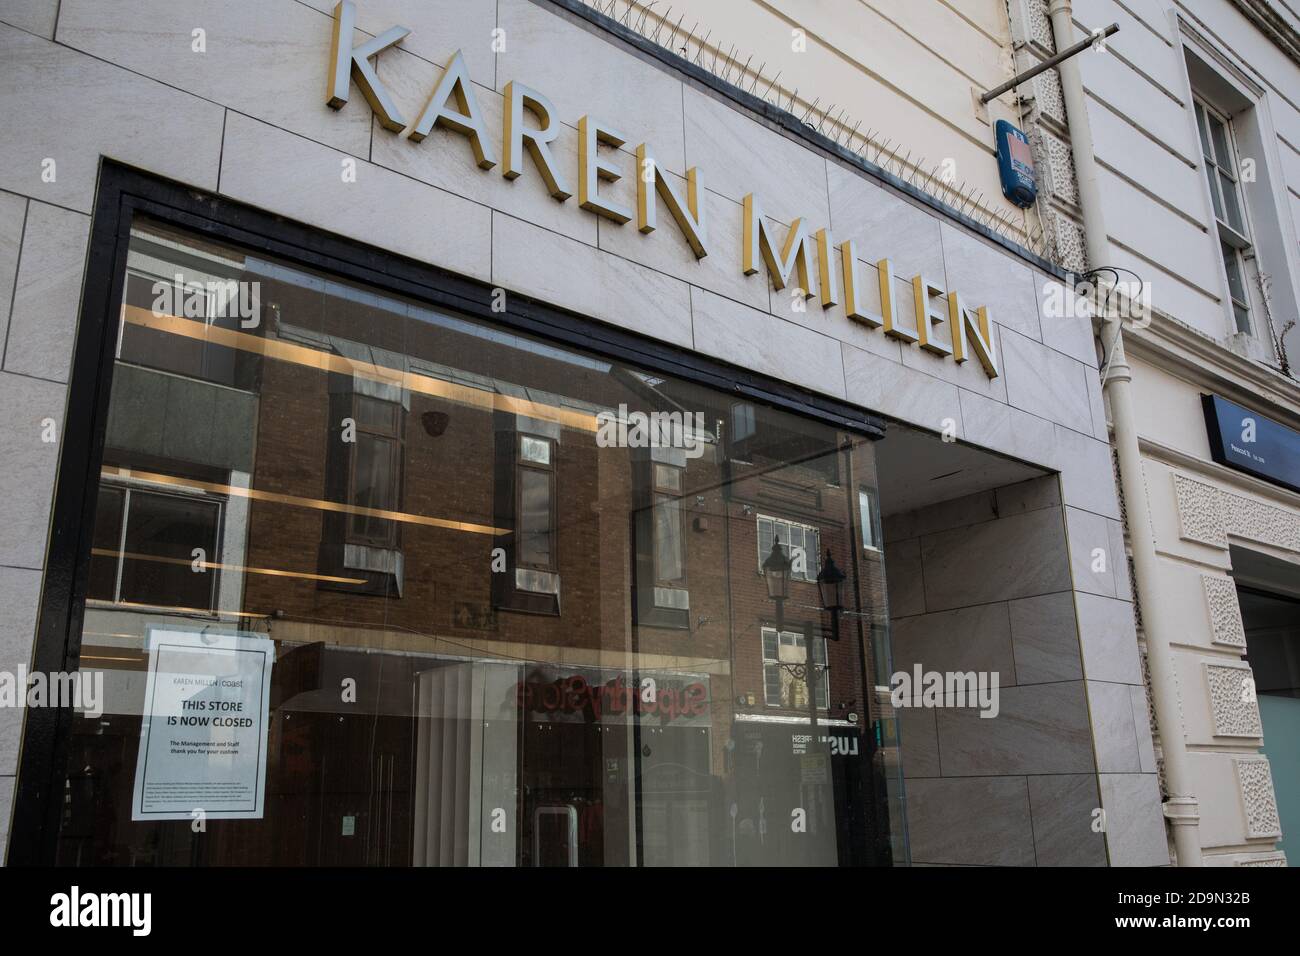 Karen Millen Fashion High Resolution Stock Photography and Images - Alamy